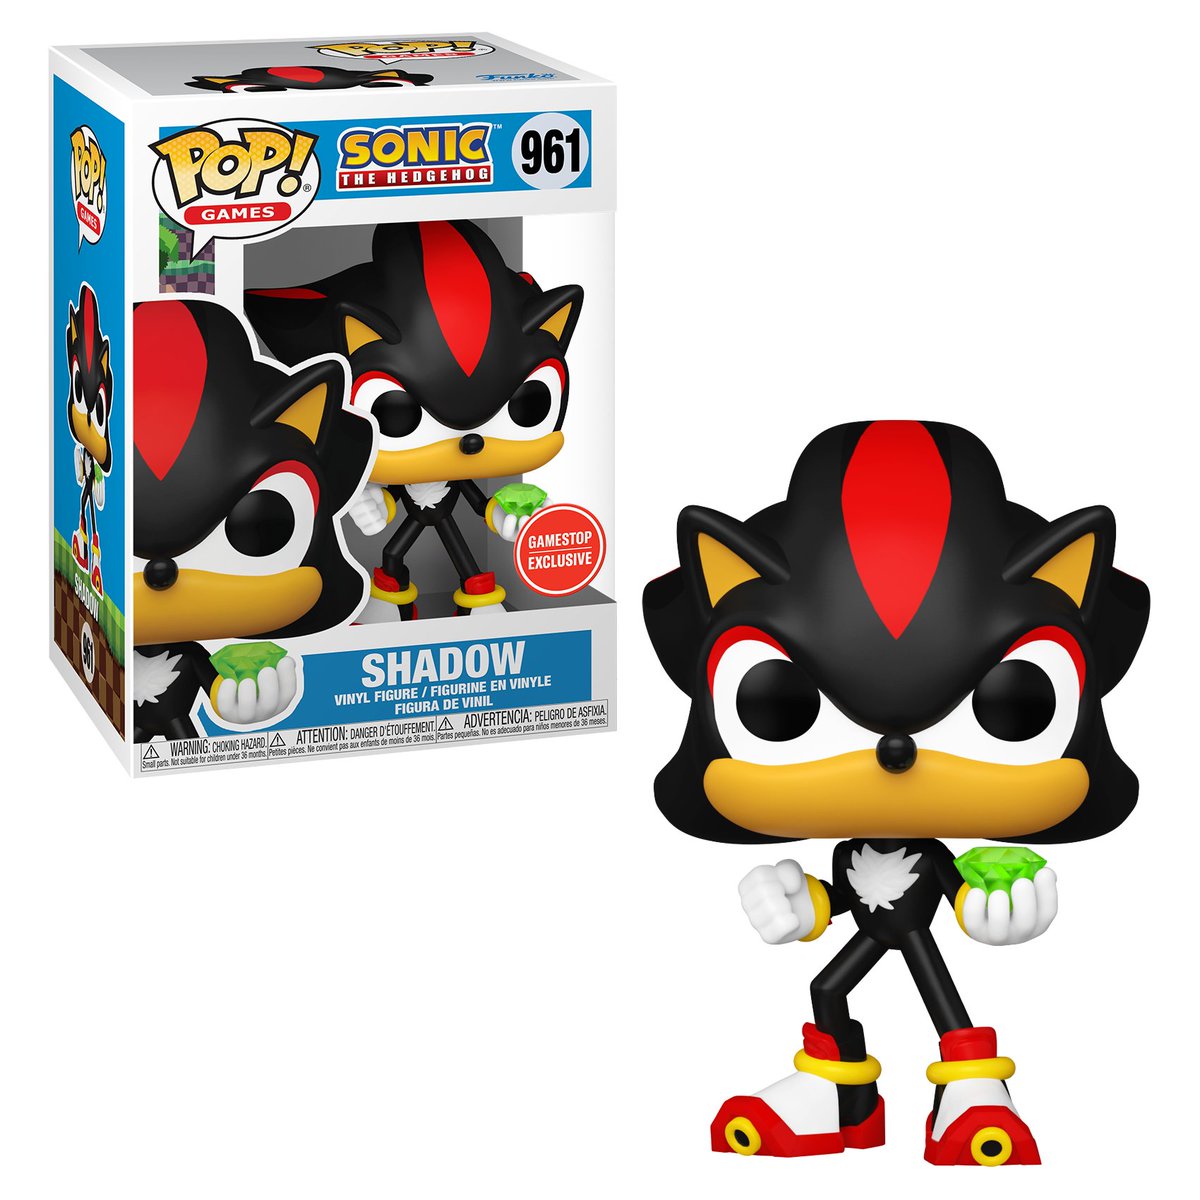 First look at GameStop Exclusive Shadow with Chaos Emerald Funko Pop! Vinyl. Coming soon! Link: finderz.info/3V3LvfZ #Ad #SonicTheHedgehog #Funko #FunkoPop #FunkoPops #FunkoPopVinyl #Pop #PopVinyl #FunkoCollector #Collectible #Collectibles #Toy #Toys #FunkoFinderz